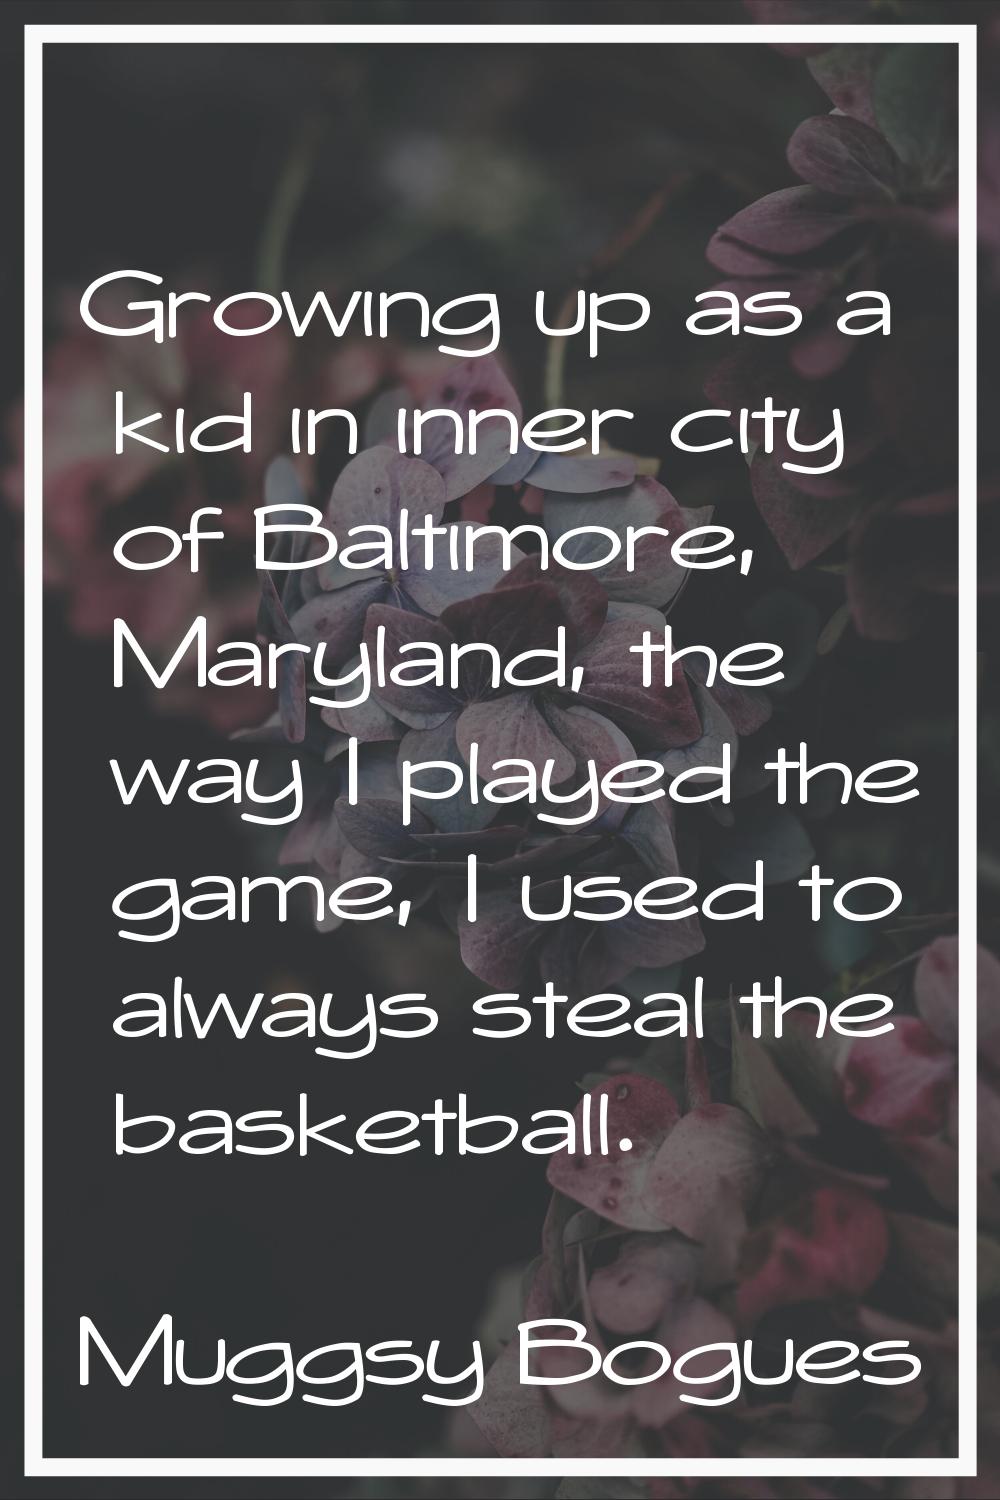 Growing up as a kid in inner city of Baltimore, Maryland, the way I played the game, I used to alwa